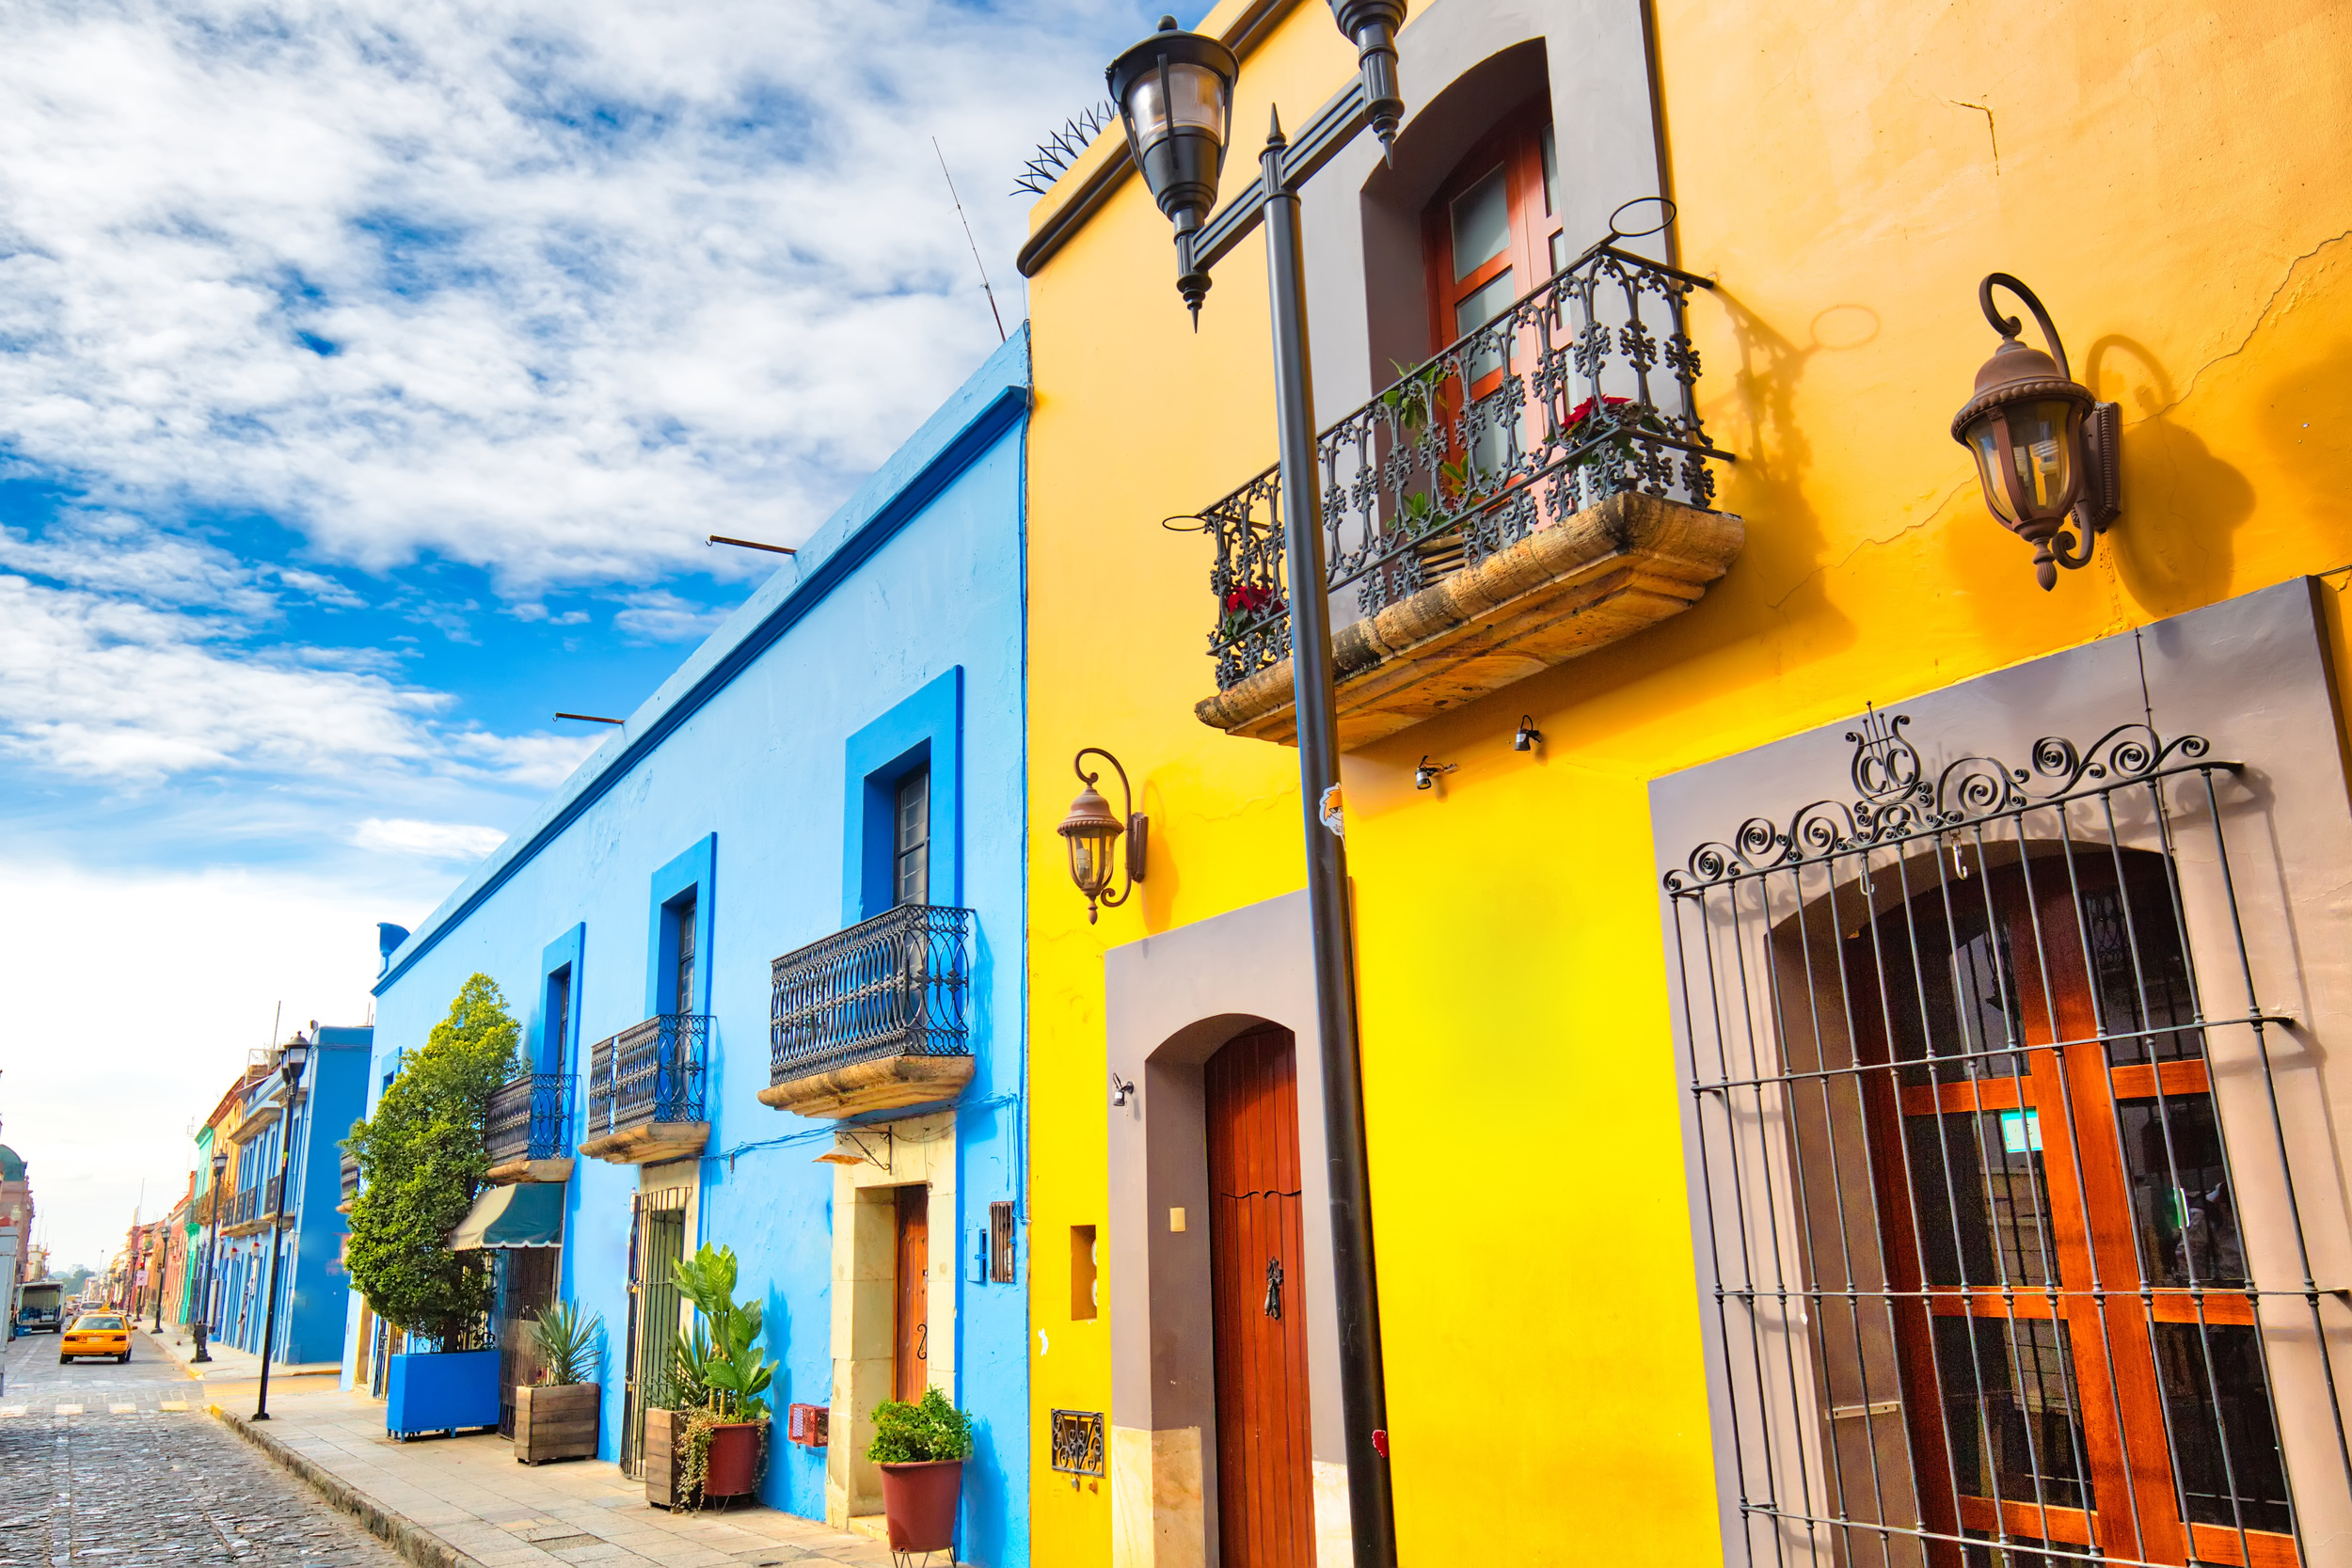 <p>Southern Mexico, particularly Oaxaca, is known for its unique cuisine. Enjoy it all with your partner and take in the distinct colors and architecture of the city. And enjoy the live music that frequently plays in the streets.</p><p>You may also like: <a href='https://www.yardbarker.com/lifestyle/articles/food_and_drinks_you_must_try_in_the_balkans_012424/s1__38890362'>Food and drinks you must try in the Balkans</a></p>